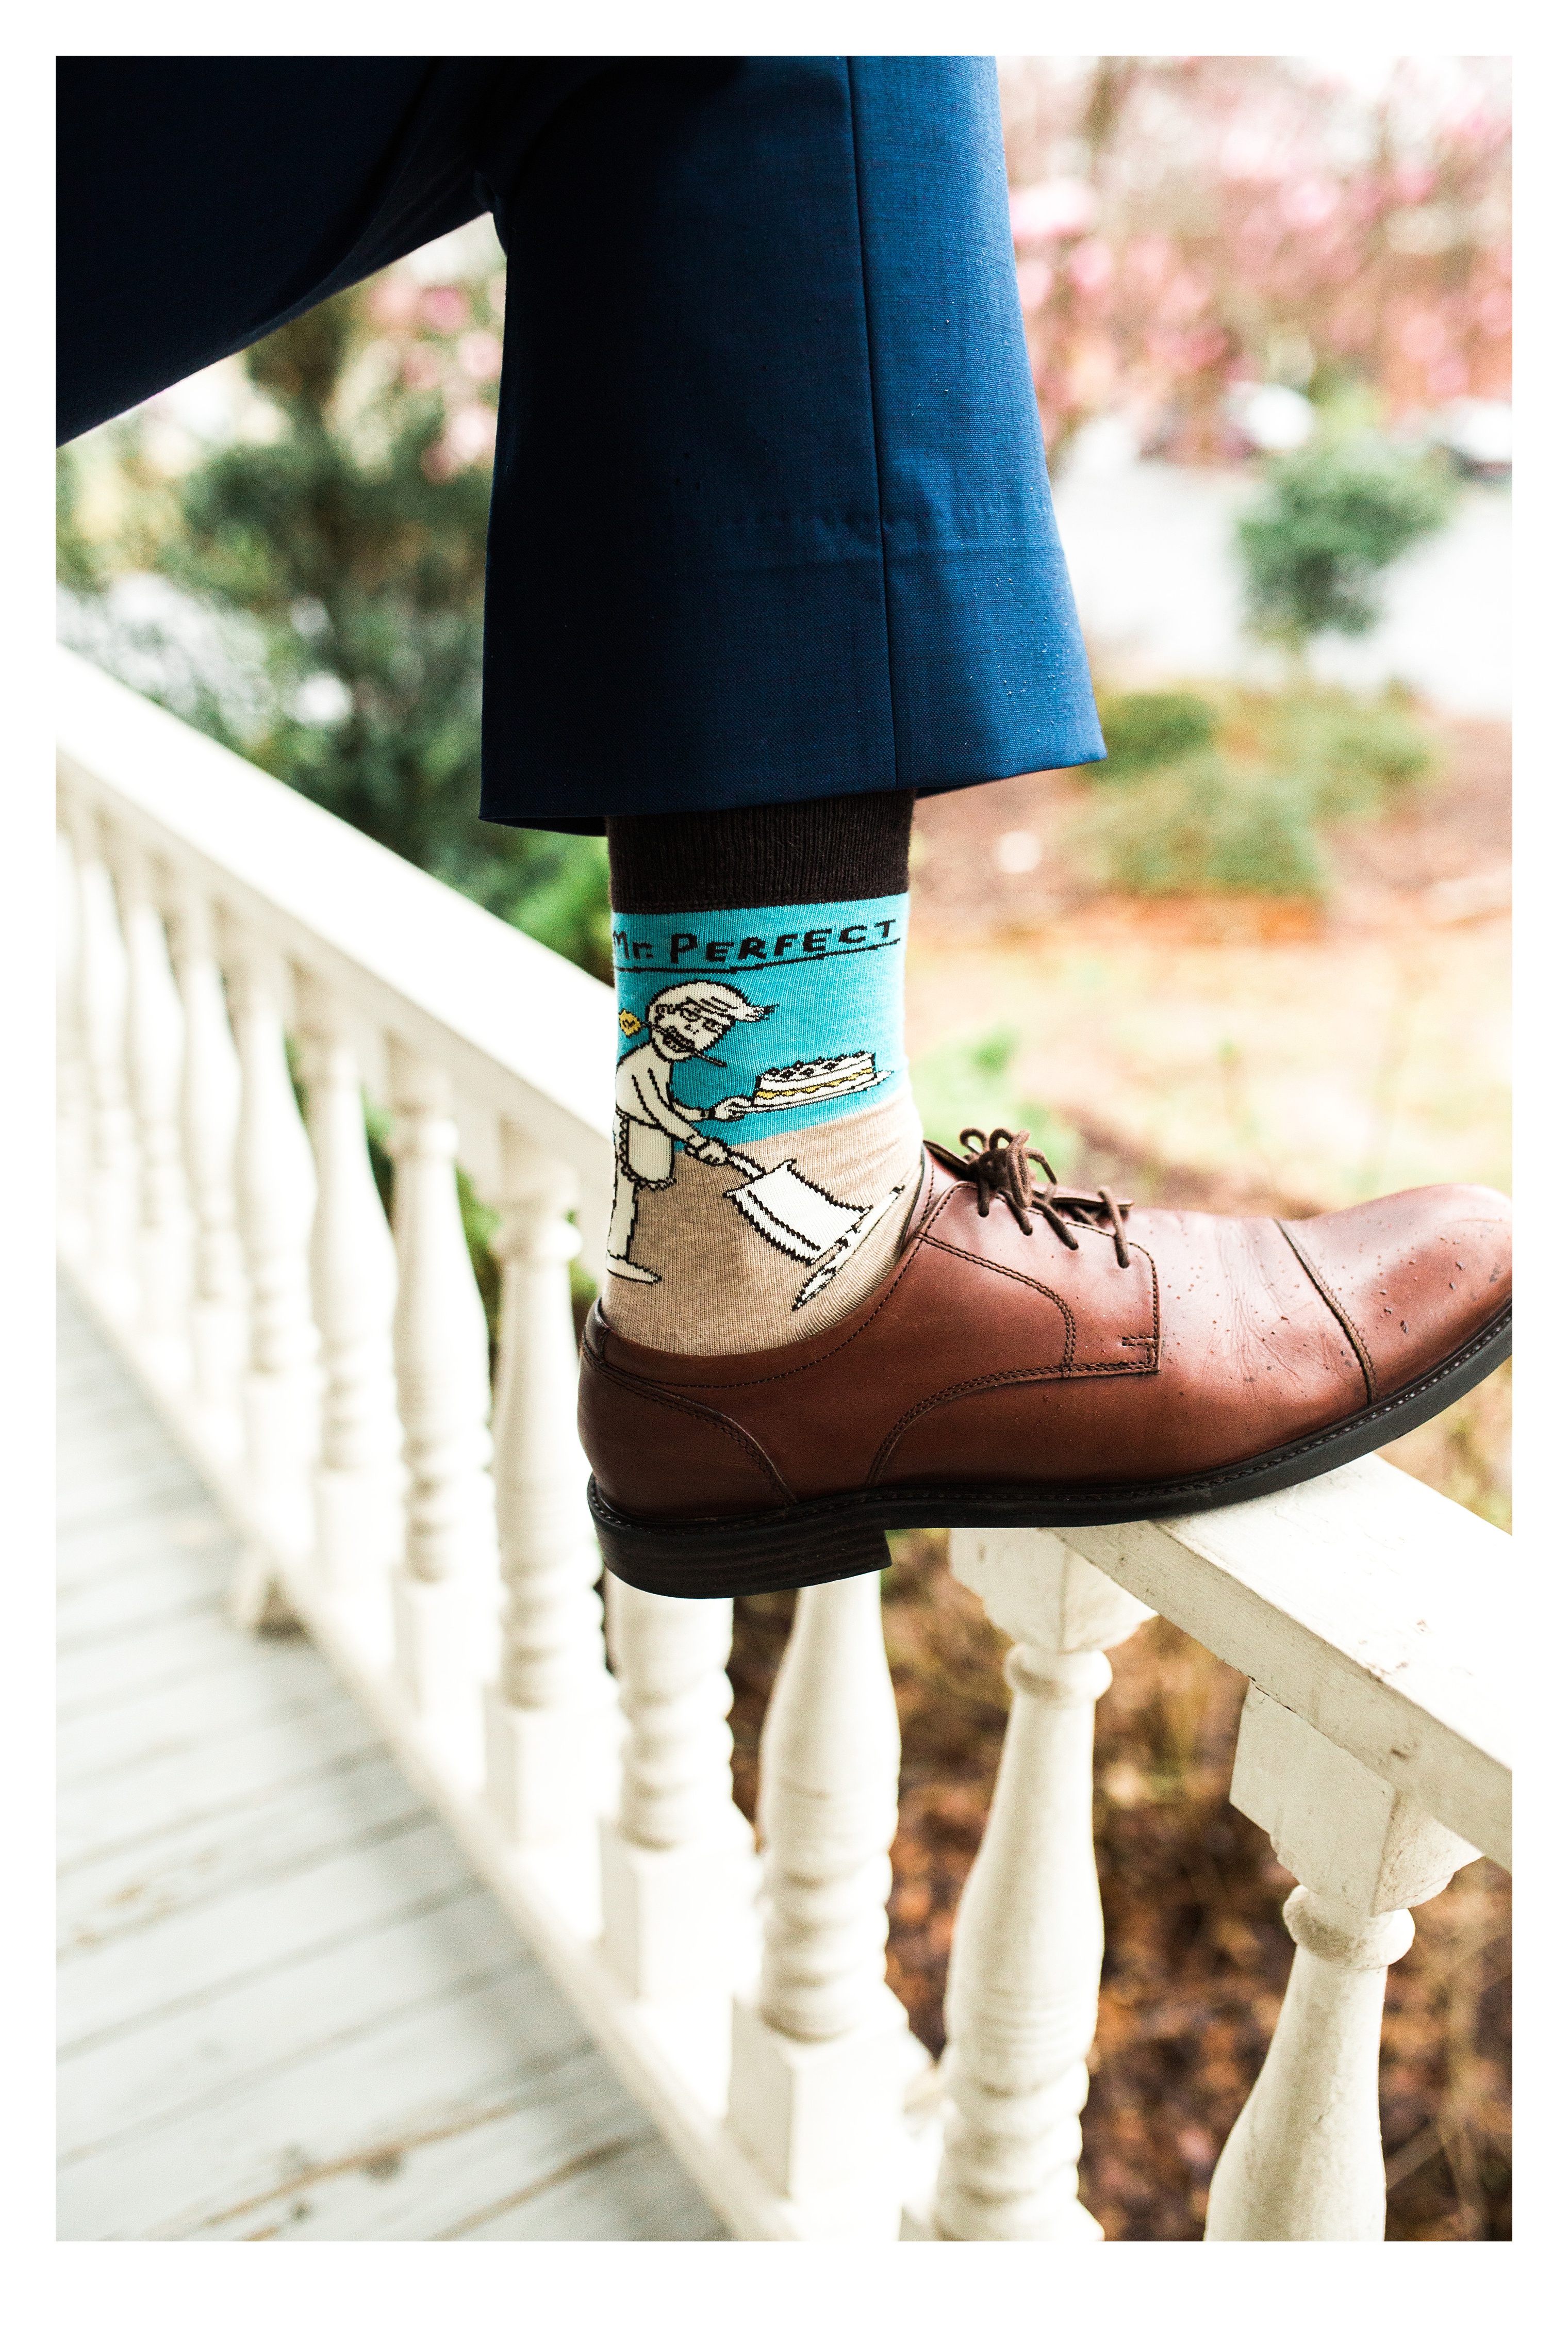 Groom showing his shoes and crazy socks